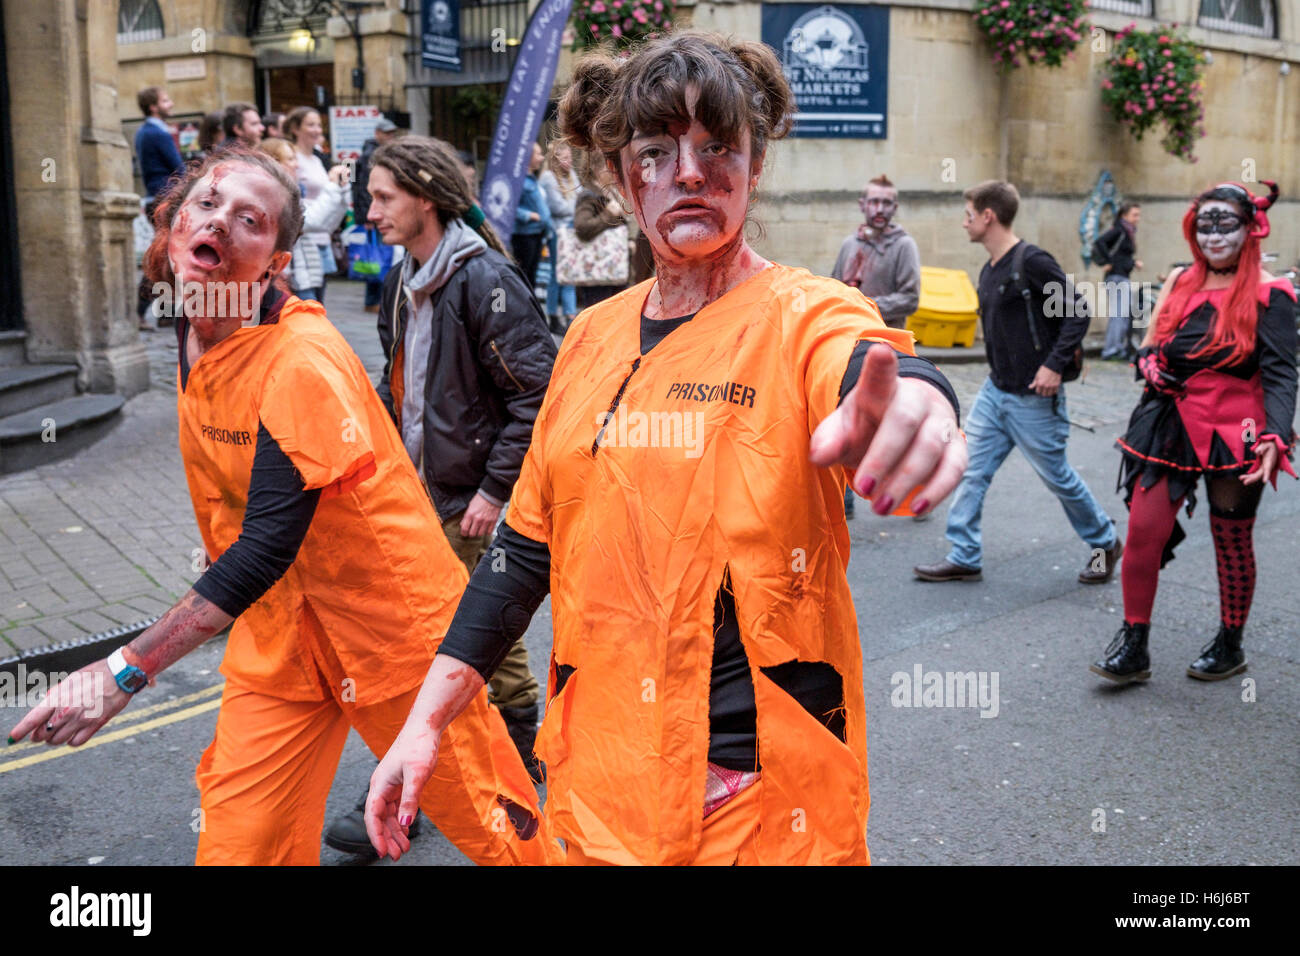 Bristol, UK. 29th Oct, 2016. People dressed as Zombie's are pictured as they take part in the annual Bristol zombie walk. Credit:  lynchpics/Alamy Live News Stock Photo